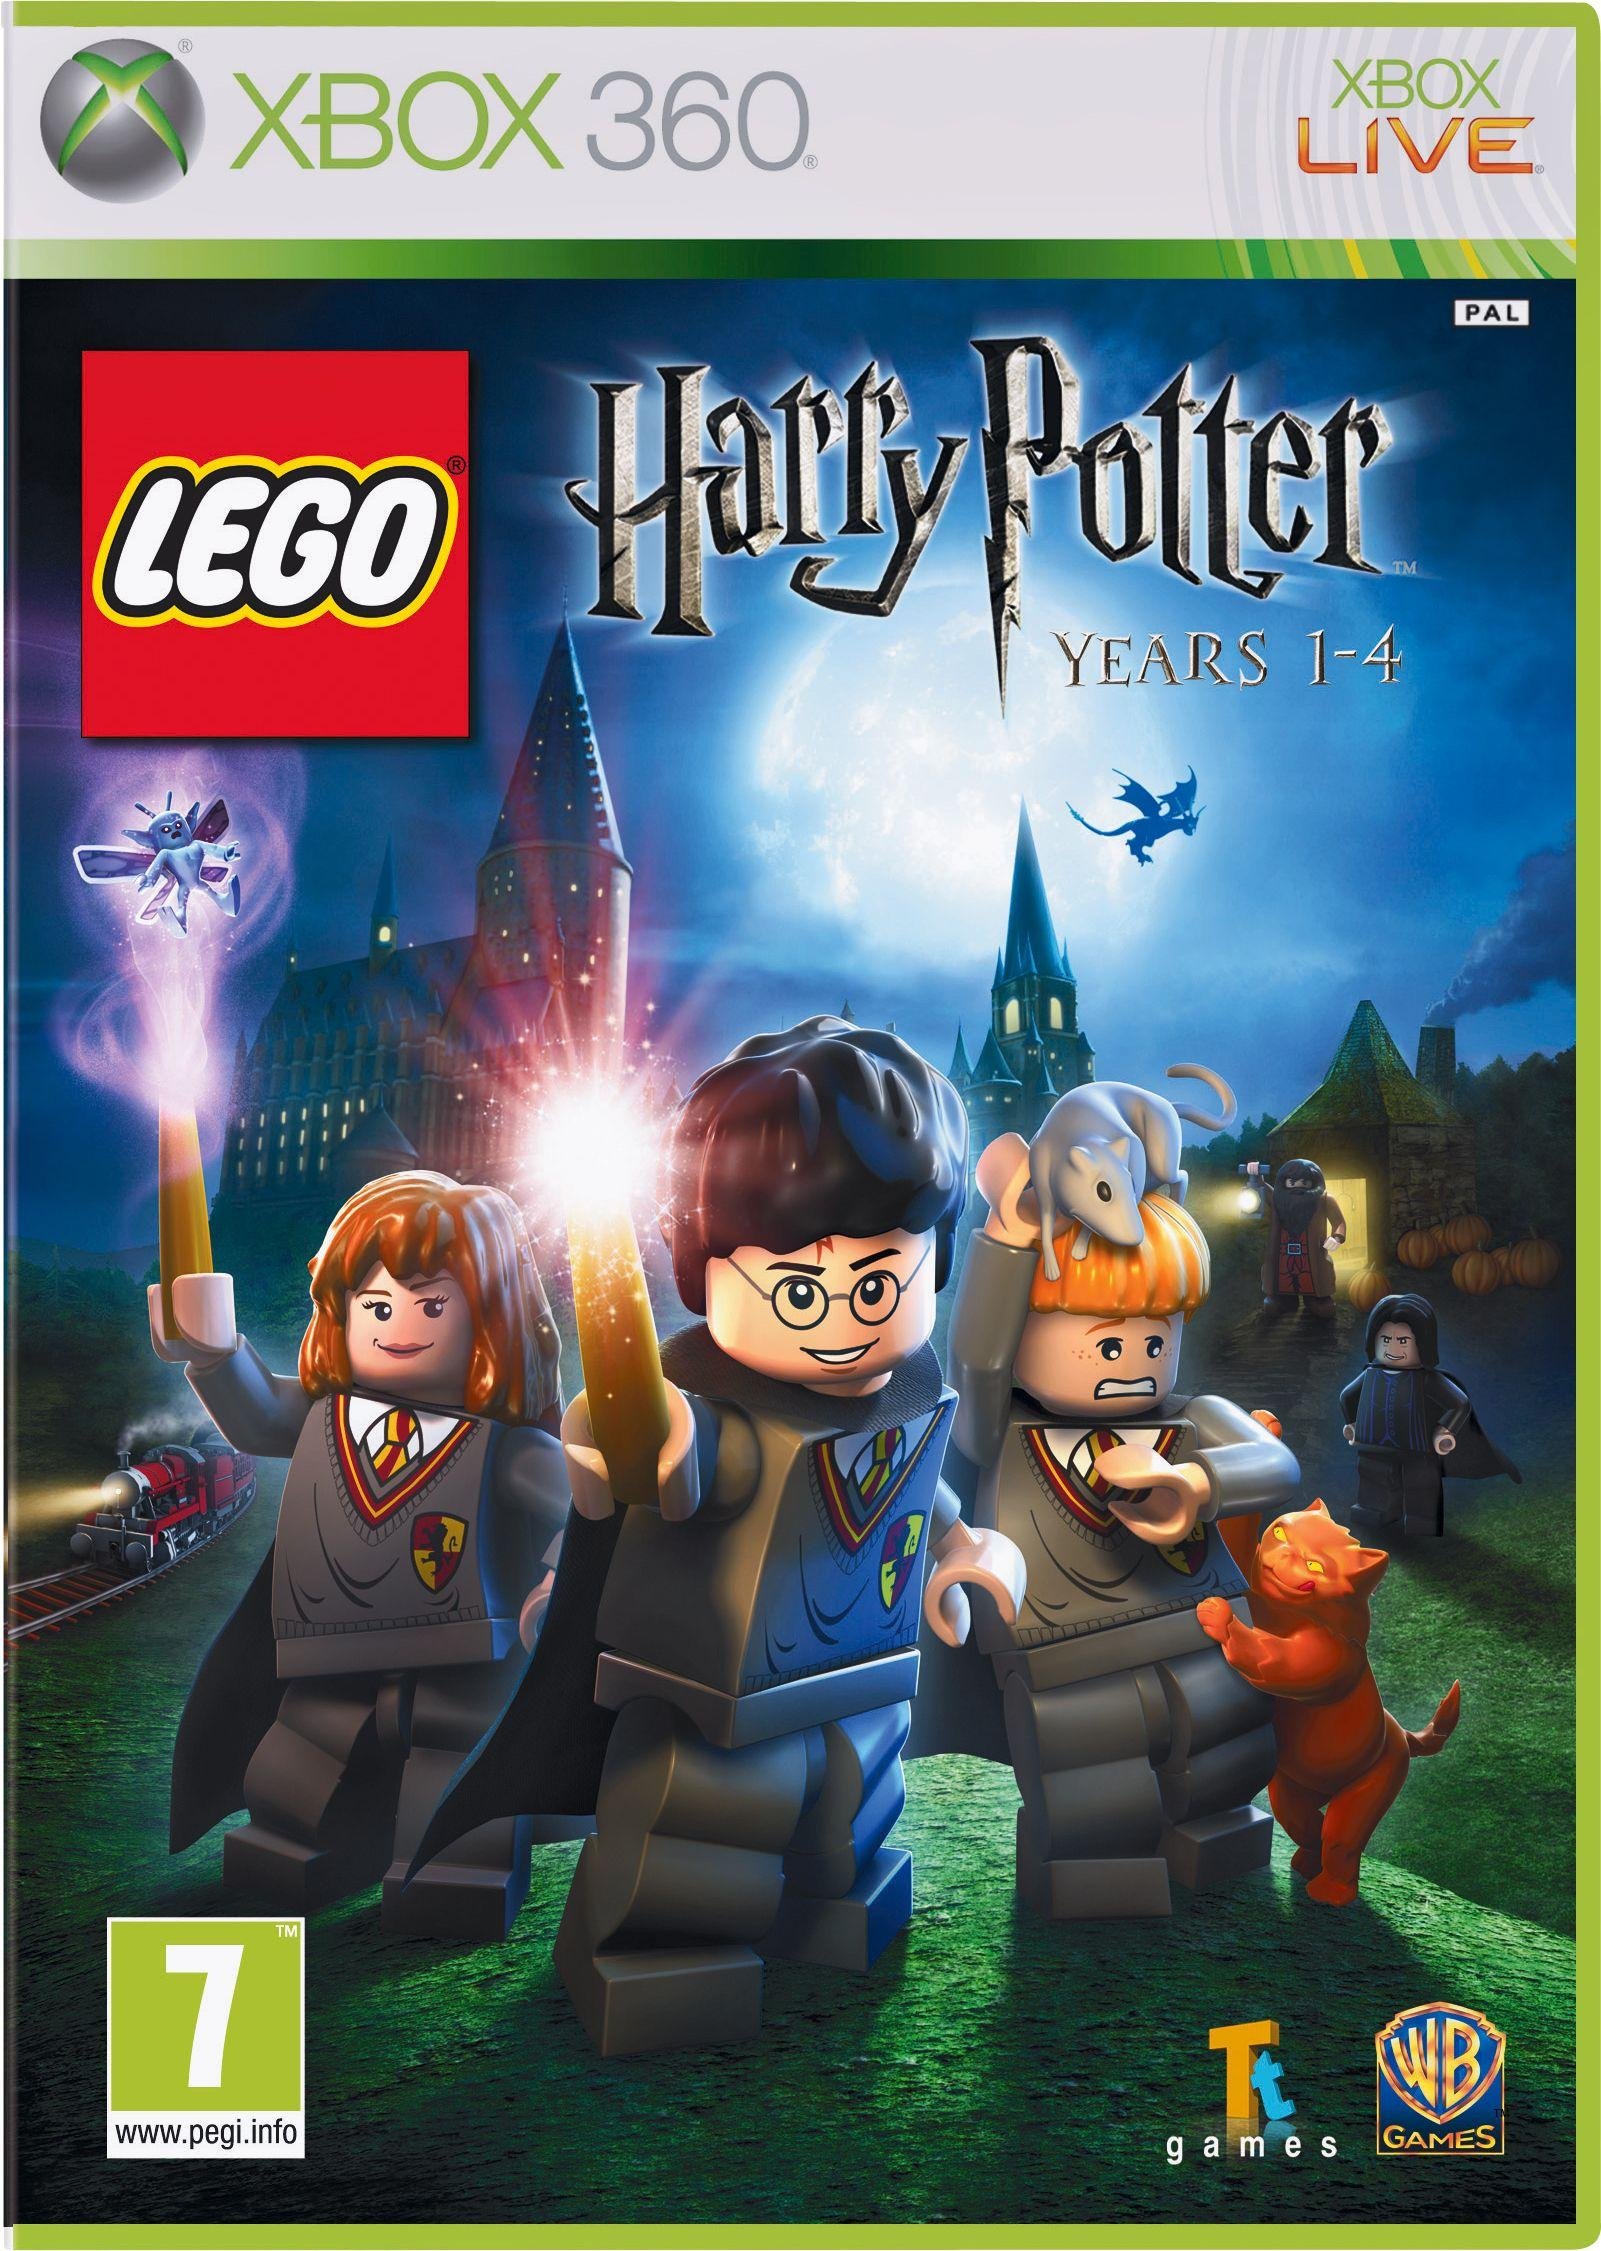 LEGO Harry Potter Years 1-4 review